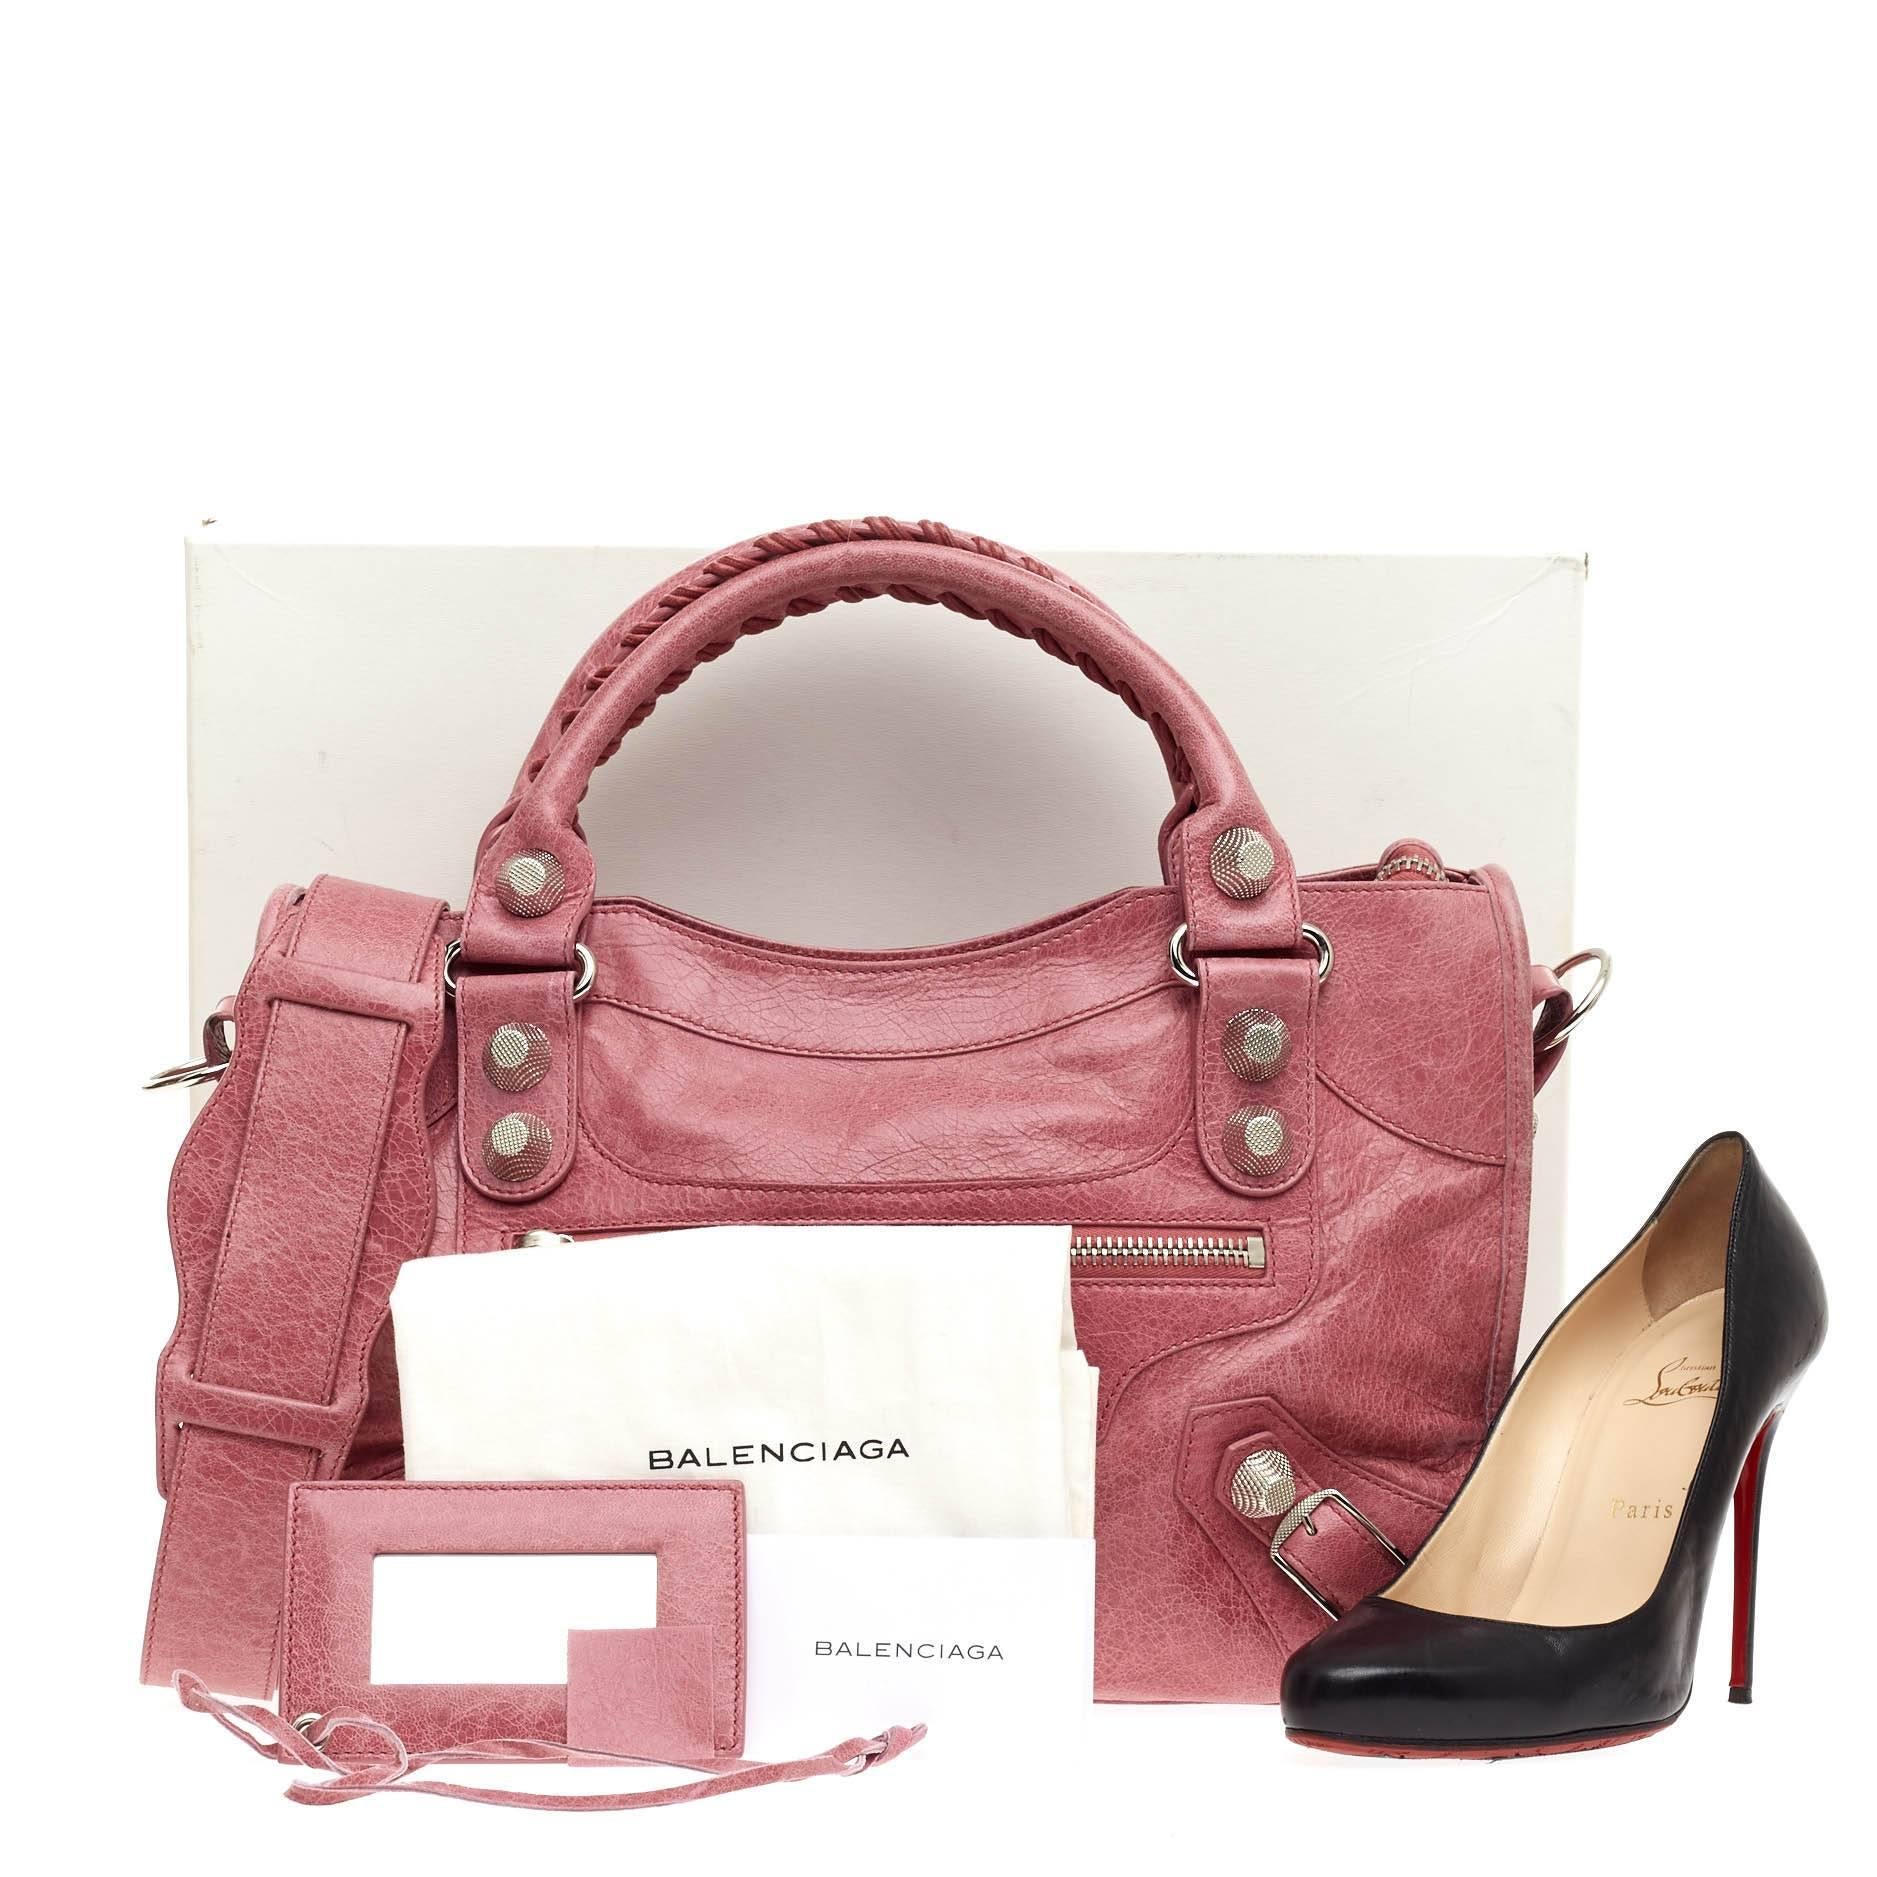 This authentic Balenciaga City Giant Studs Leather Medium is for the on-the-go fashionista. Constructed from bubblegum pink leather, this popular bag features braided woven tall handles, exterior front zip pocket, iconic Balenciaga silver giant